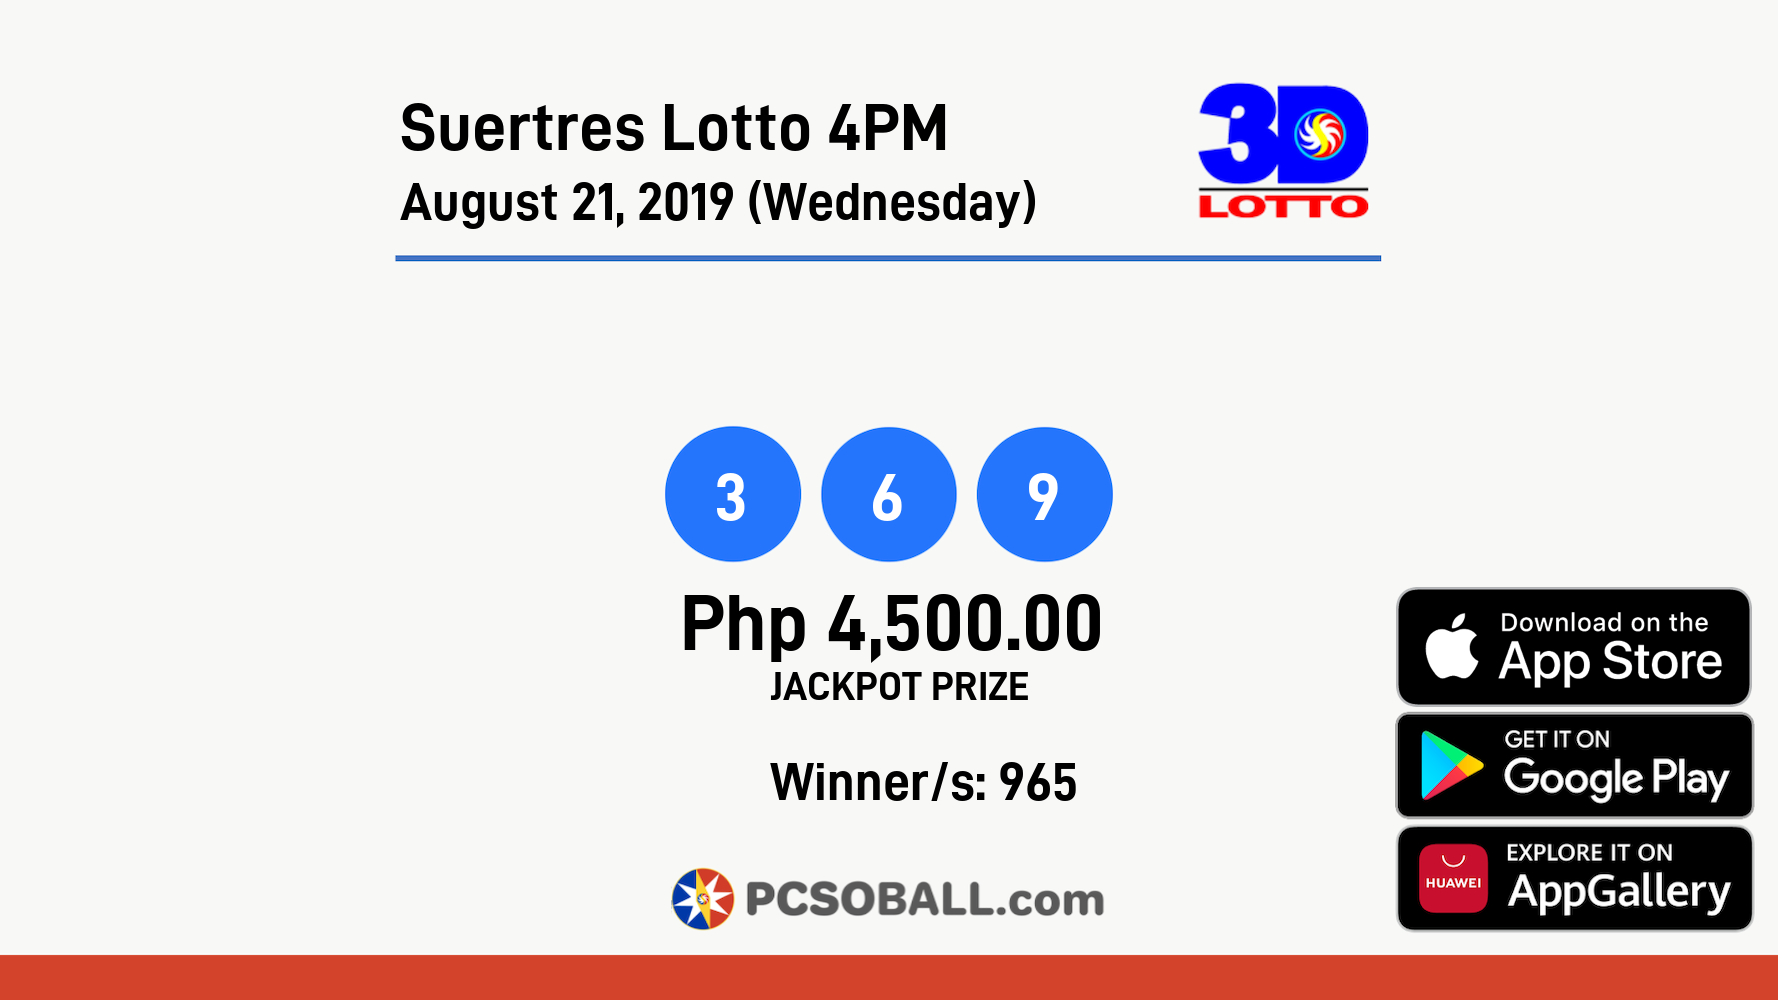 Suertres Lotto 4PM August 21, 2019 (Wednesday) Result